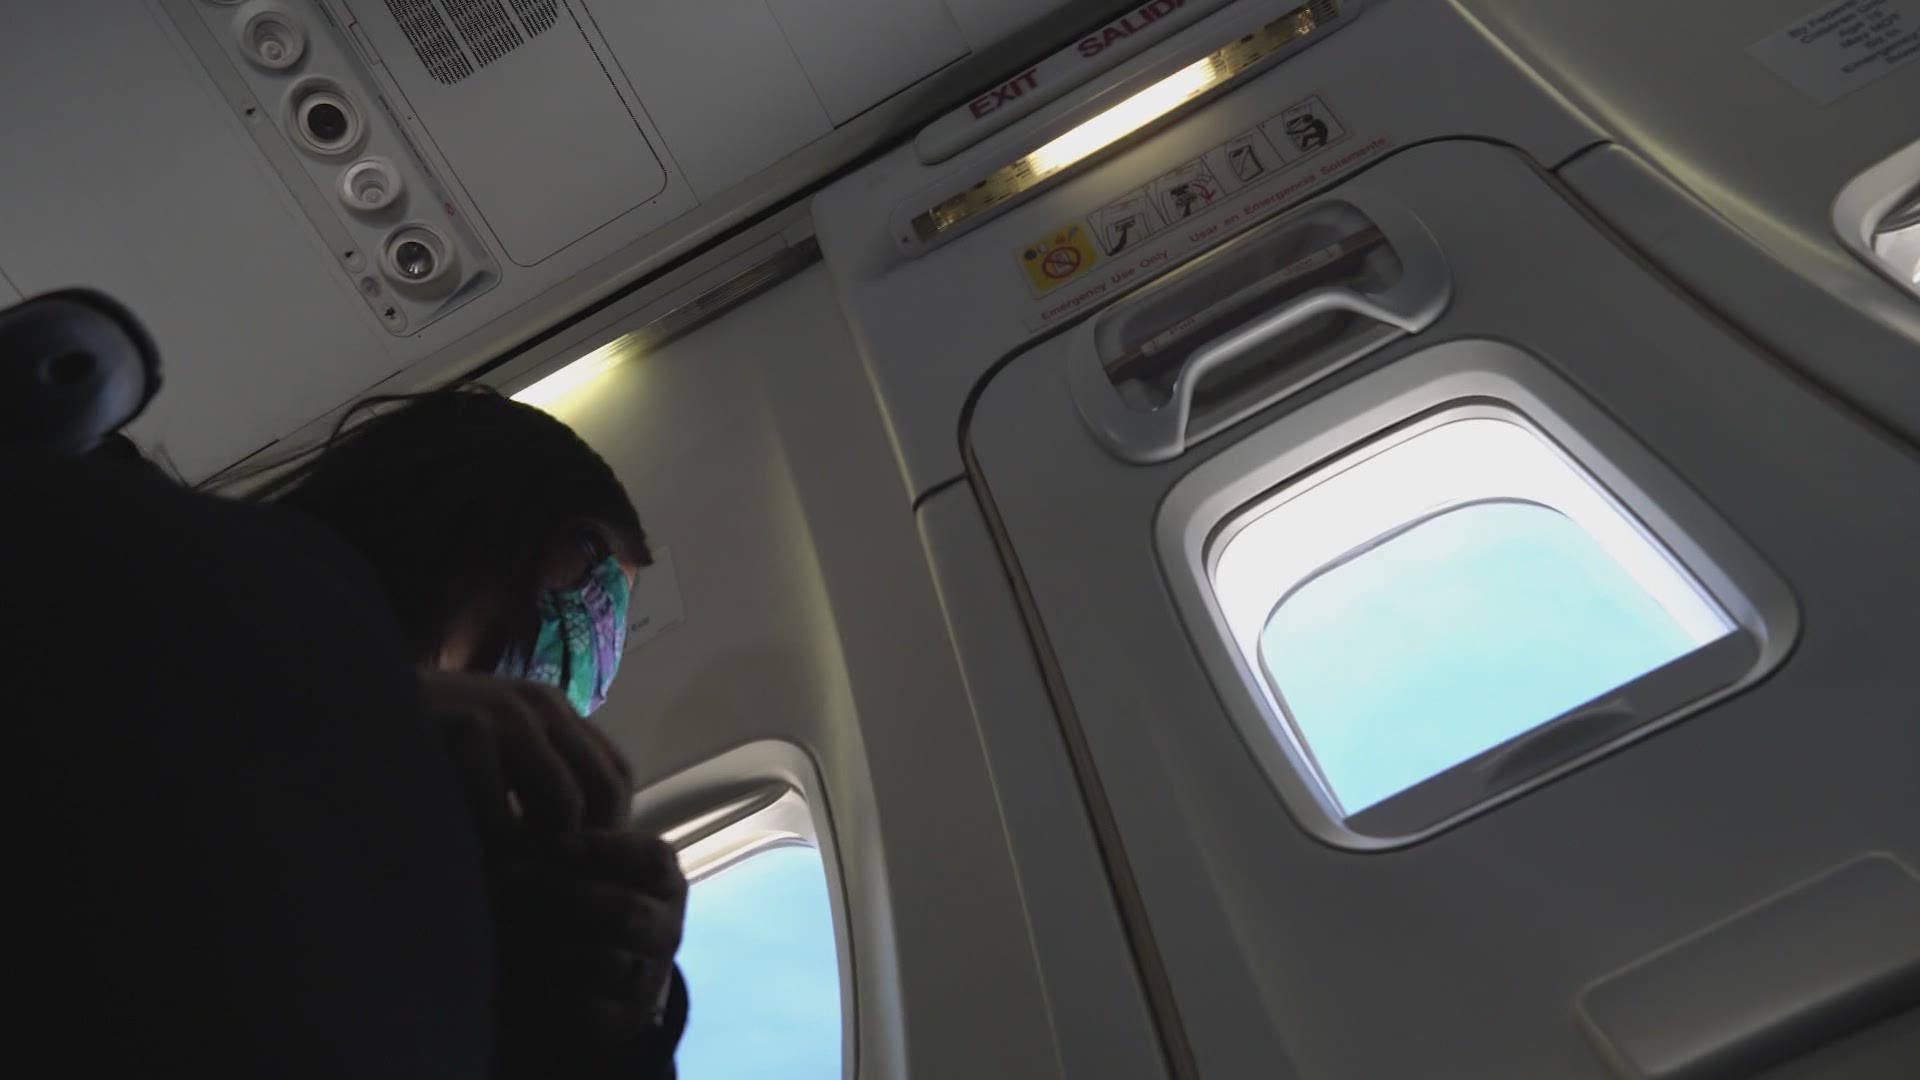 WFAA's Tiffany Liou shows a glimpse through her eyes while traveling from North Texas during the coronavirus pandemic